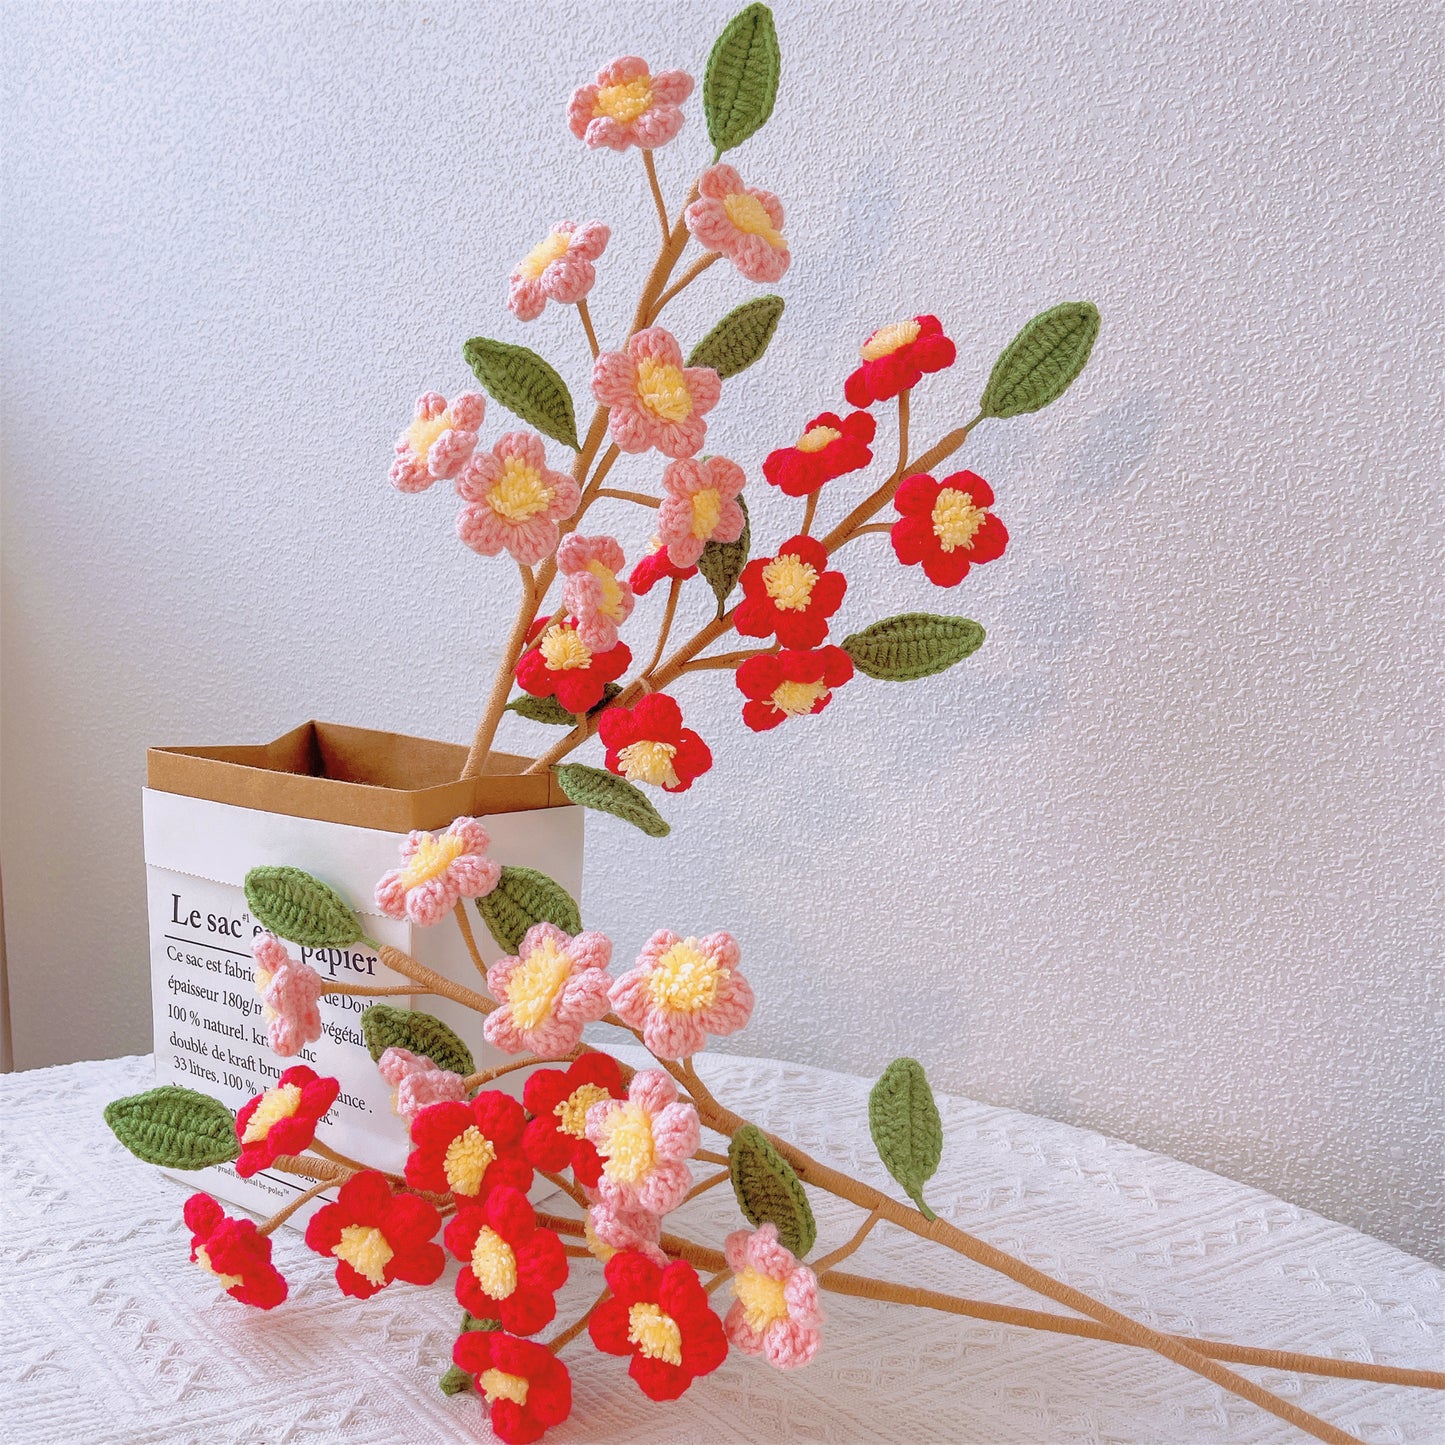 Peach Perfection: Handcrafted Crochet Peach Blossom Stake for a Beautiful Garden Decor and Meaningful Gift